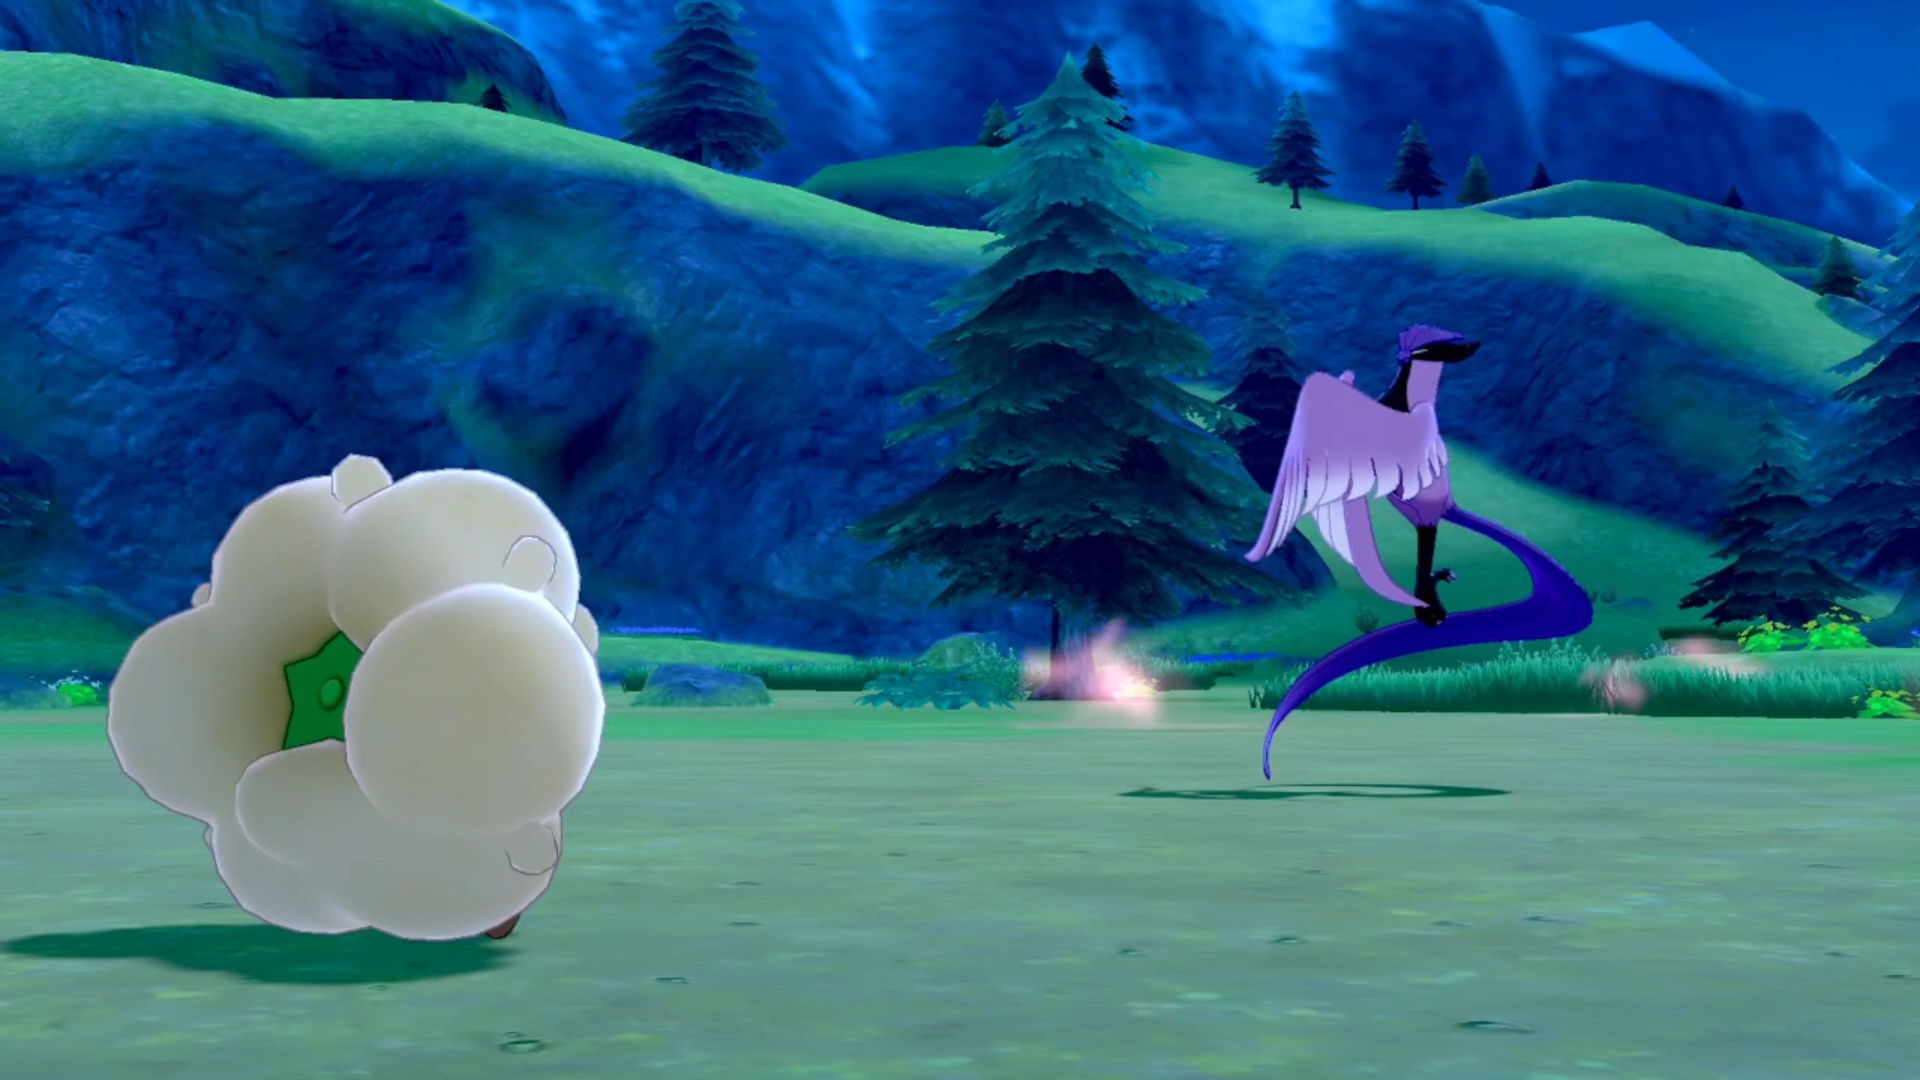 How to get Galarian Articuno in Pokemon Sword and Shield